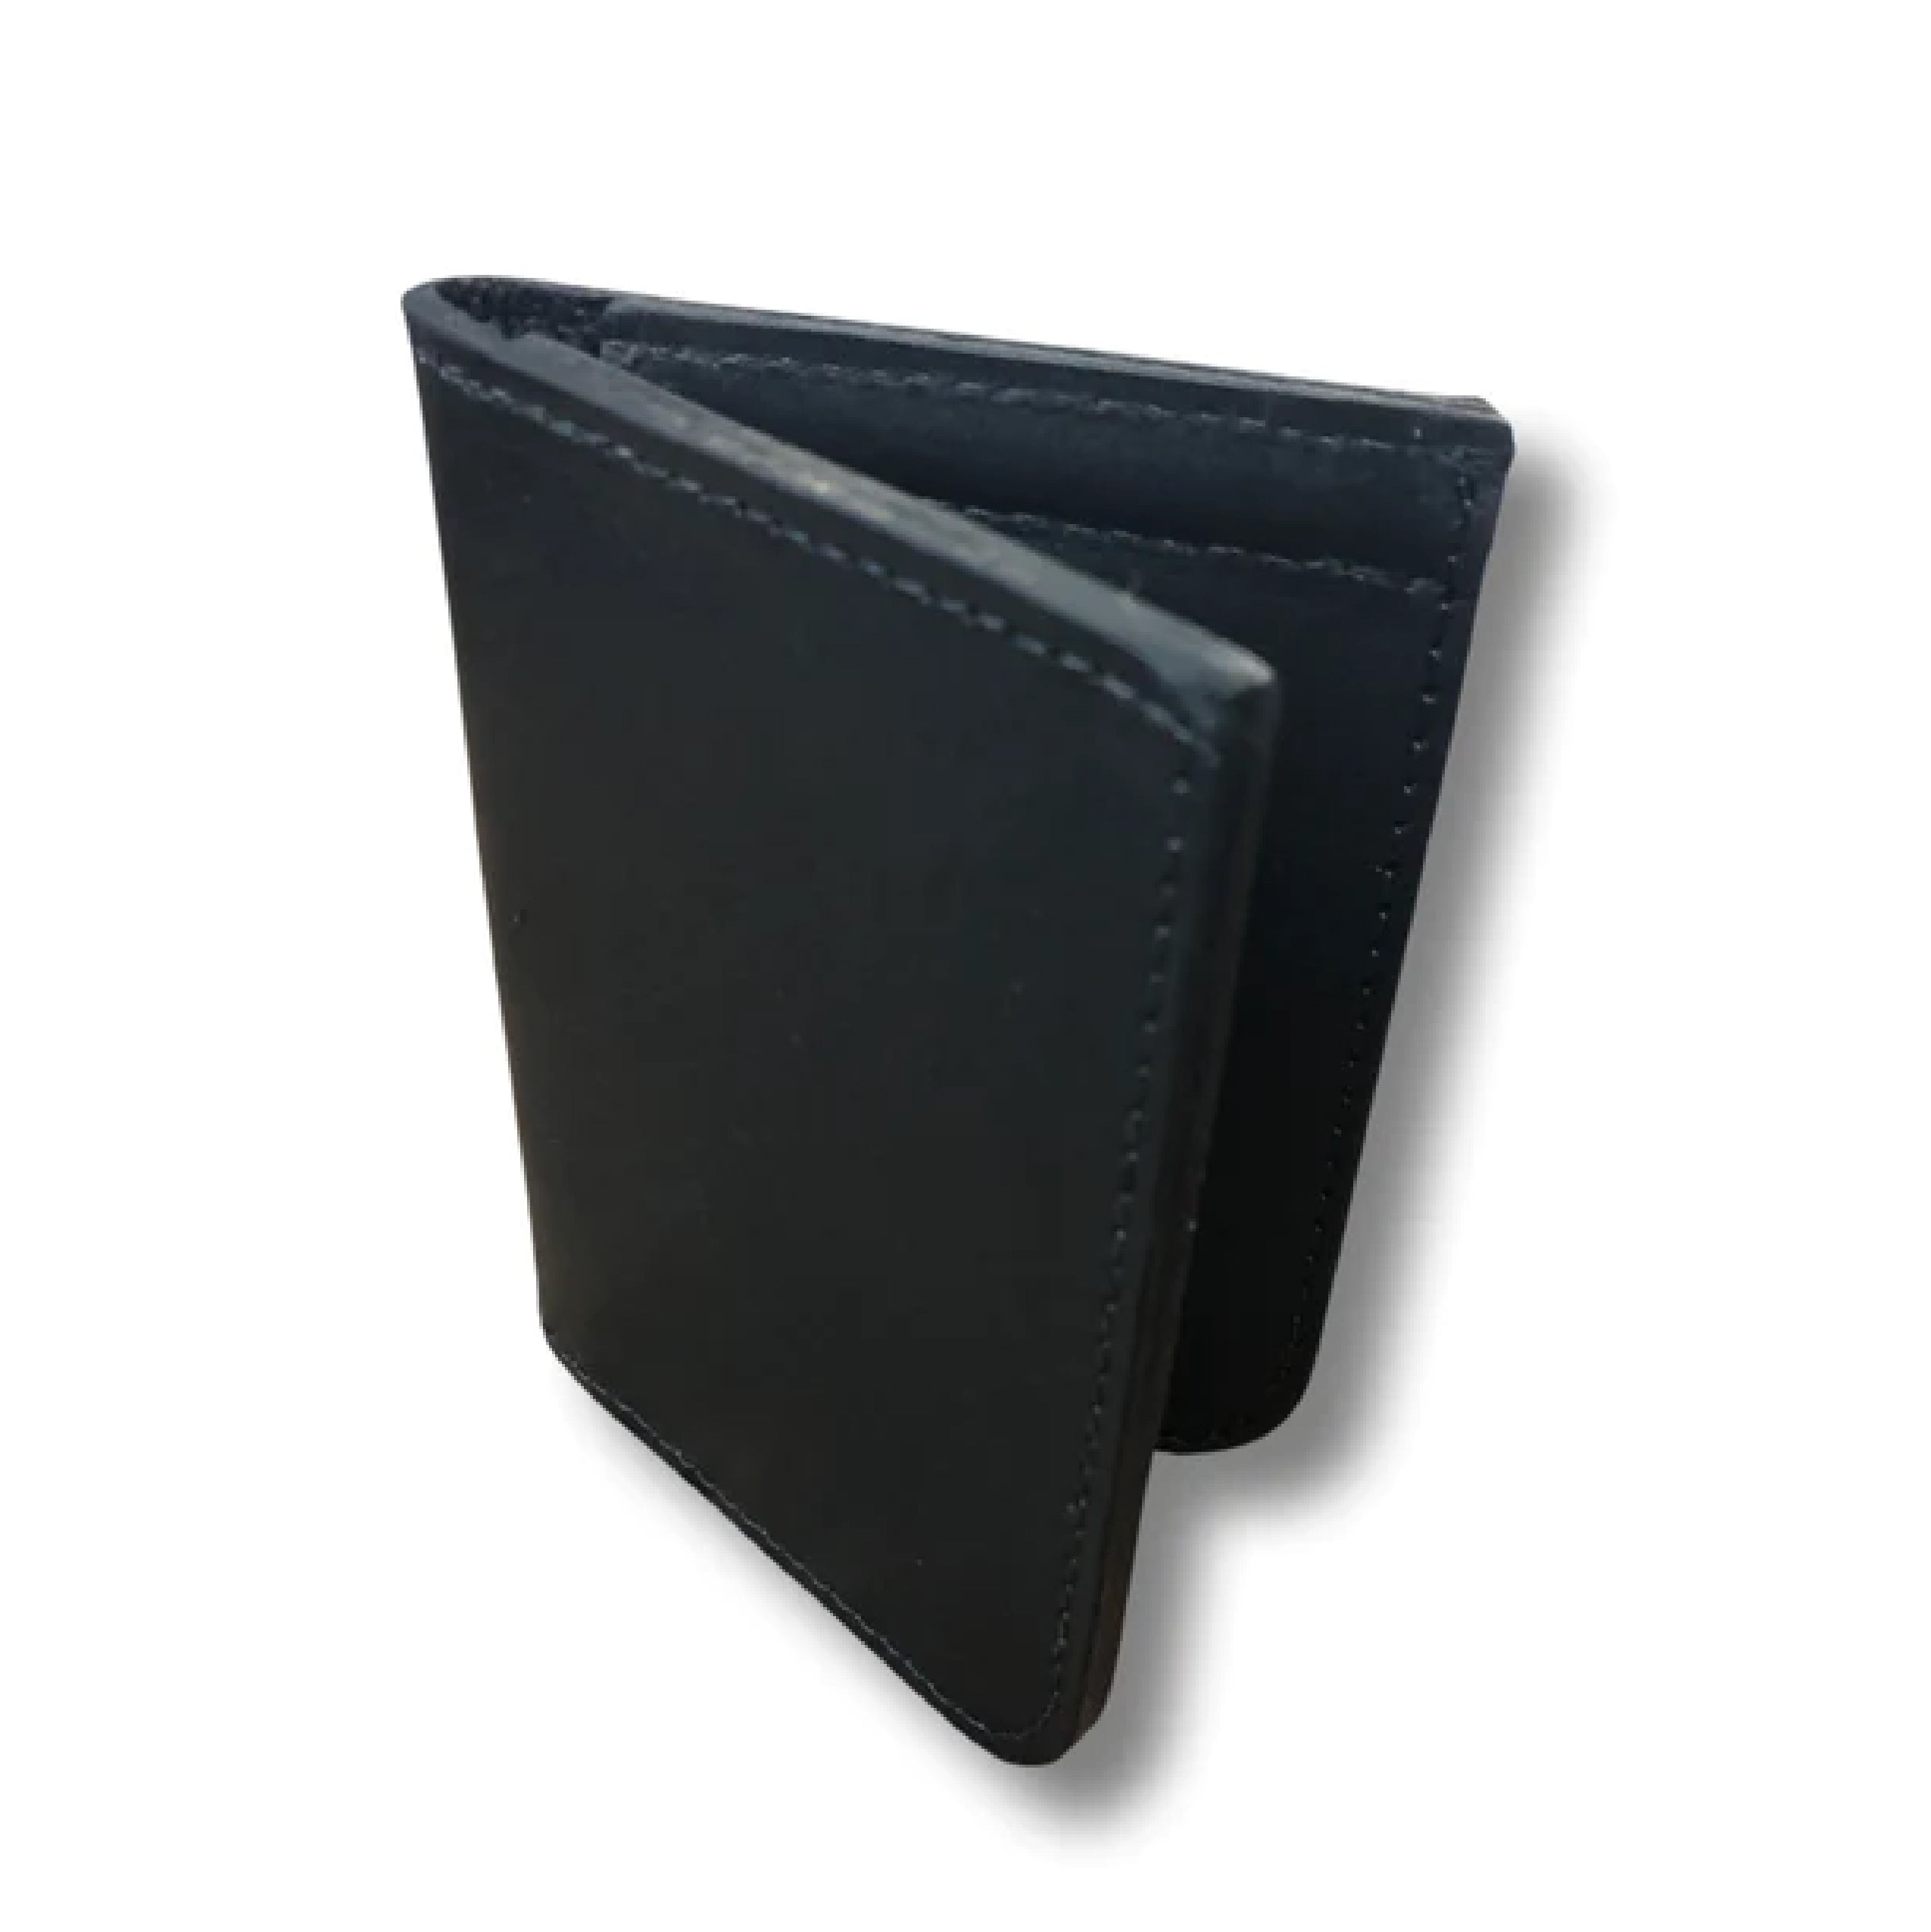 Dean WAL03a Clip Wallet black leather